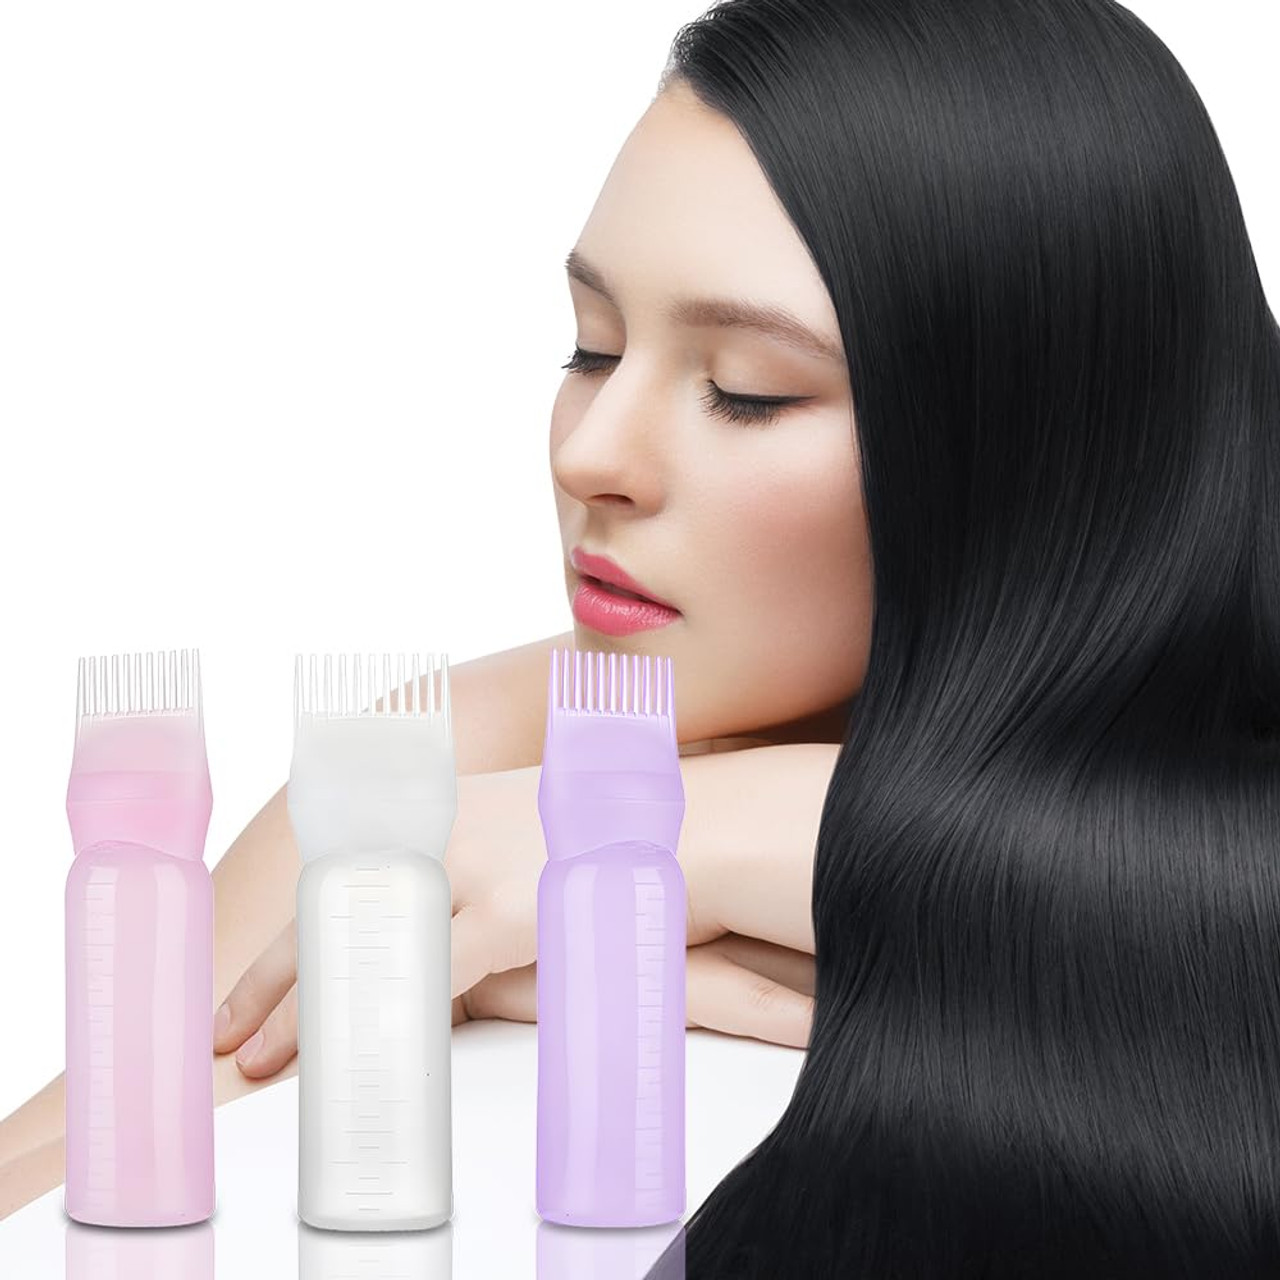 Hair Dyeing Bottle, Hair Color Applicator Bottle, 3 Colors Hair Dyeing  Bottle Brush Shampoo Hair Color Oil Comb Applicator Tool for Salon Home